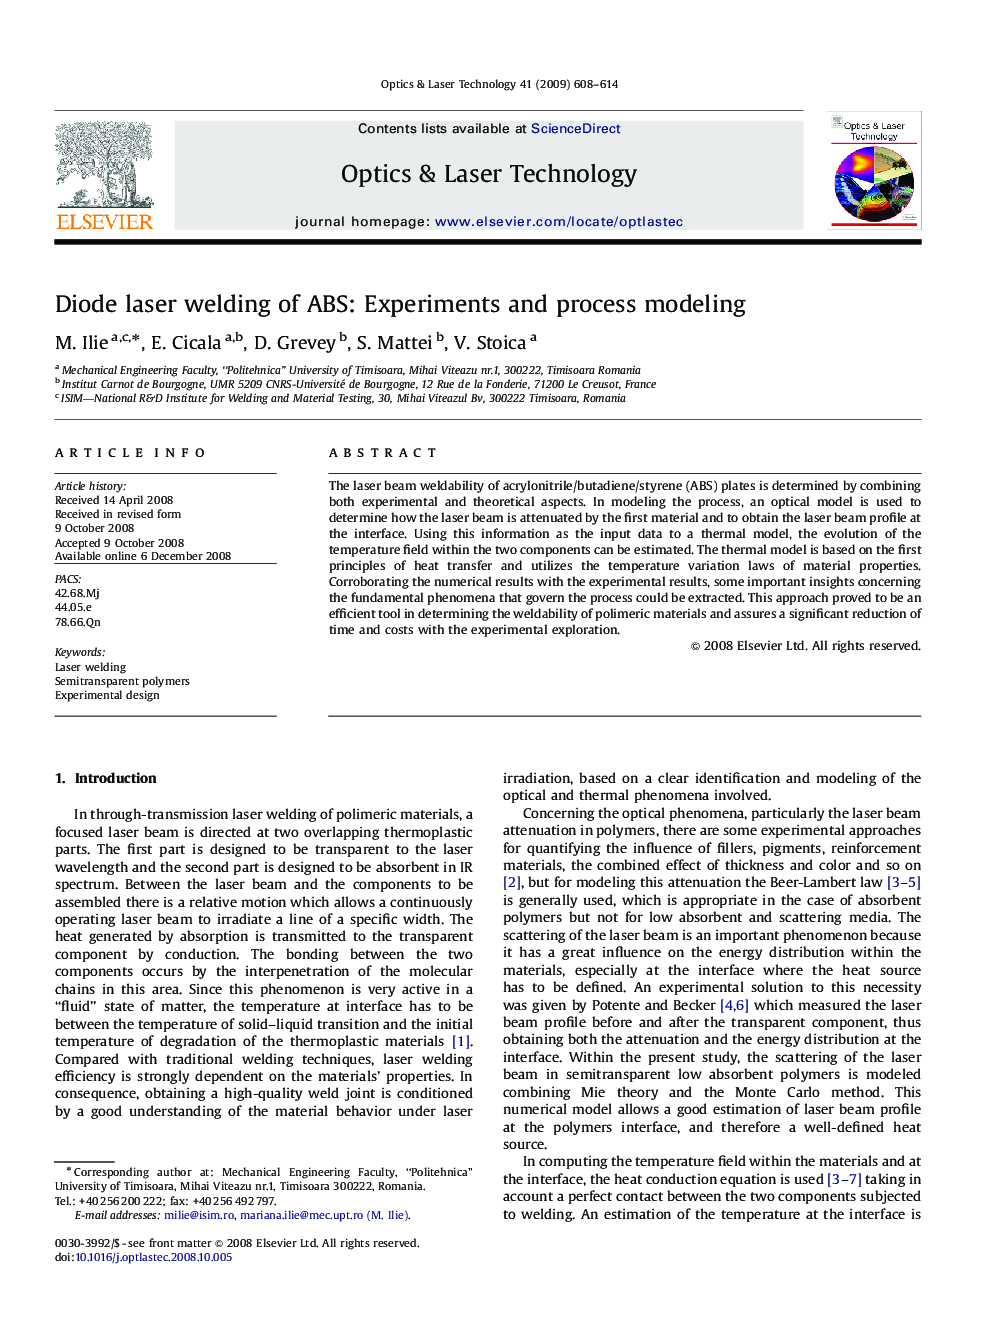 Diode laser welding of ABS: Experiments and process modeling